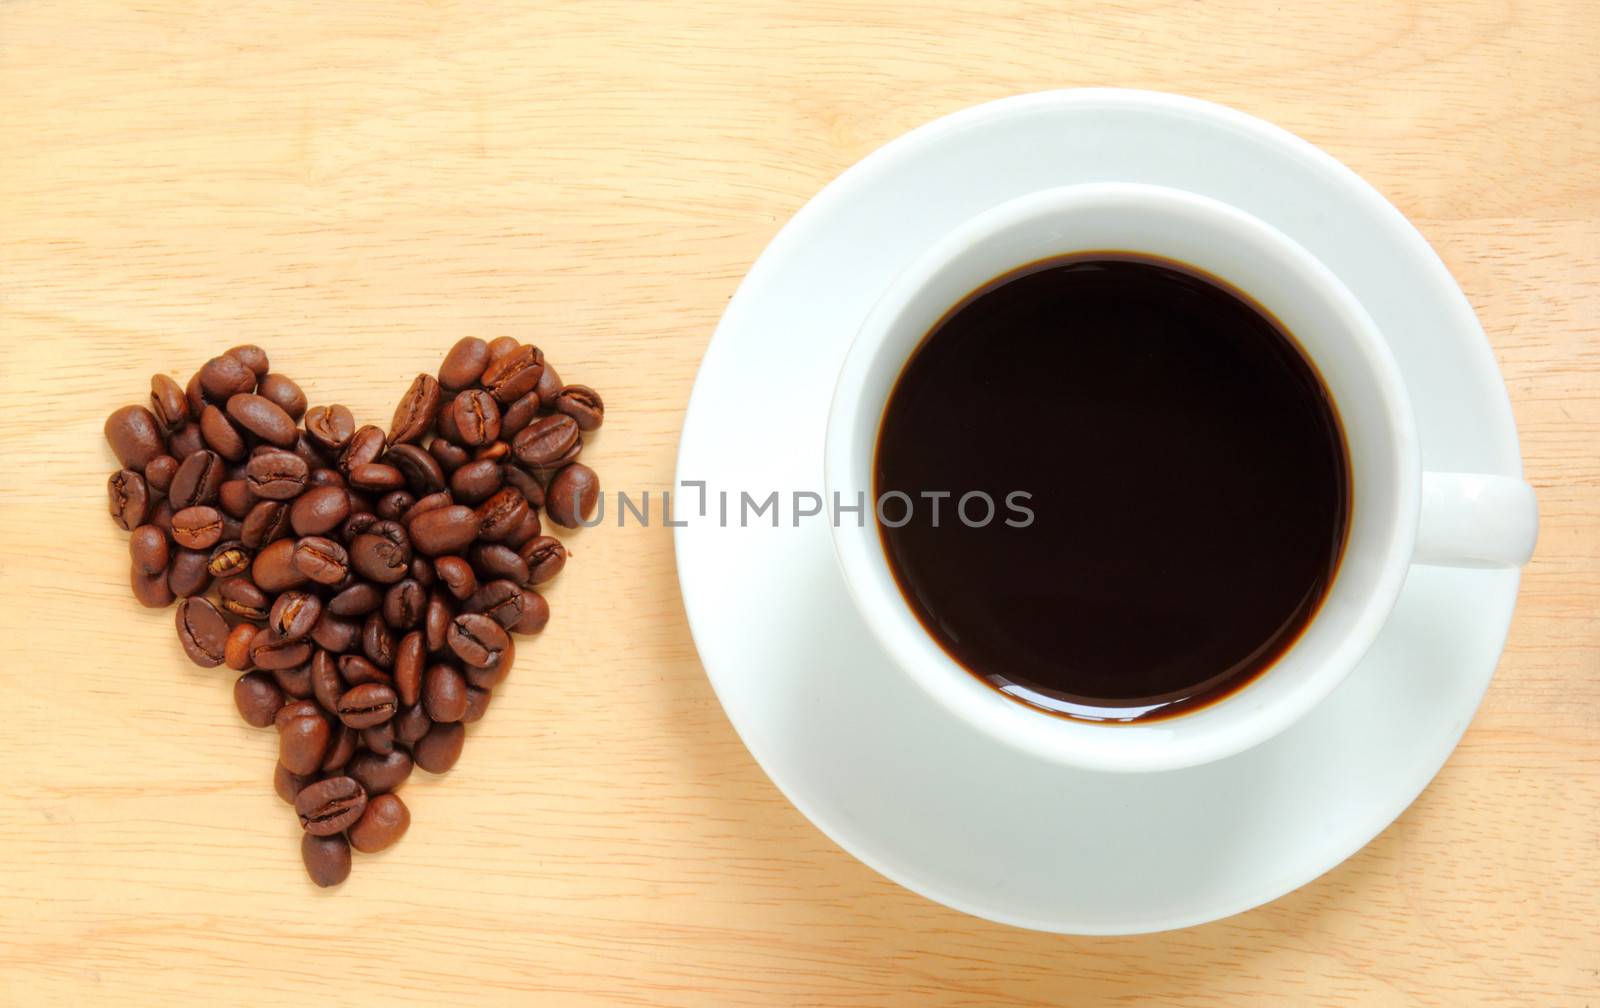 Heart shape made from coffee beans with a cup of coffee by nuchylee